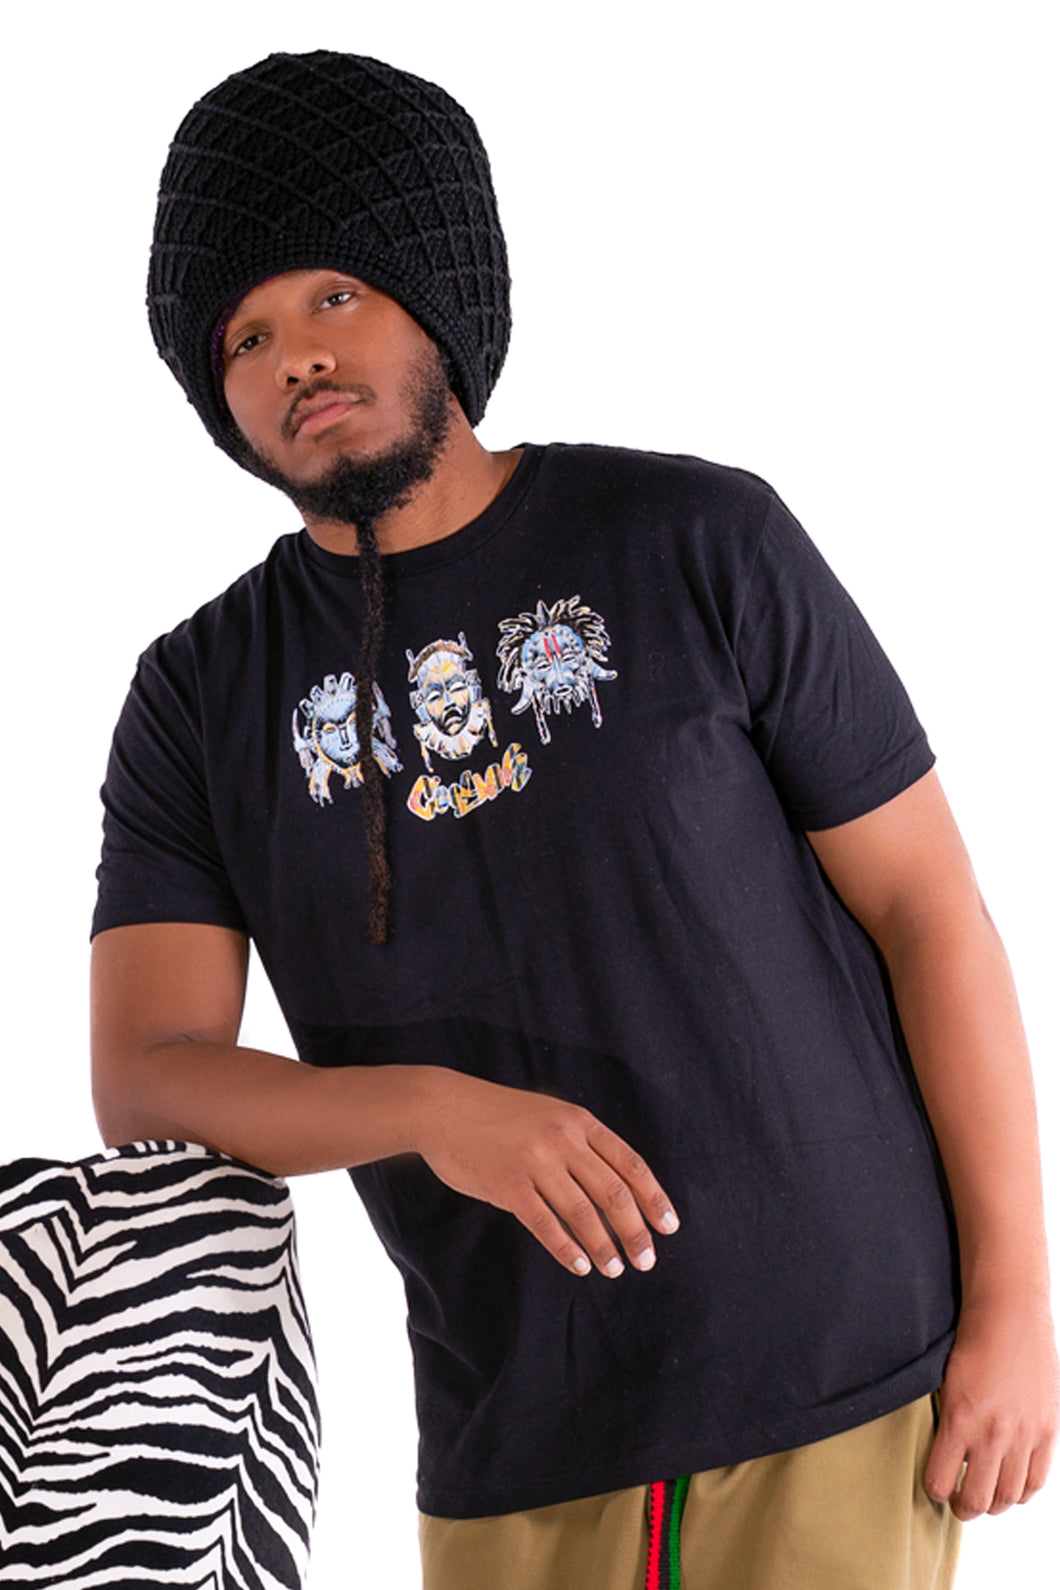 Cooyah Jamaica.  Men's afrocentric Tribal Mask Graphic Tee in black.  Jamaican clothing brand.